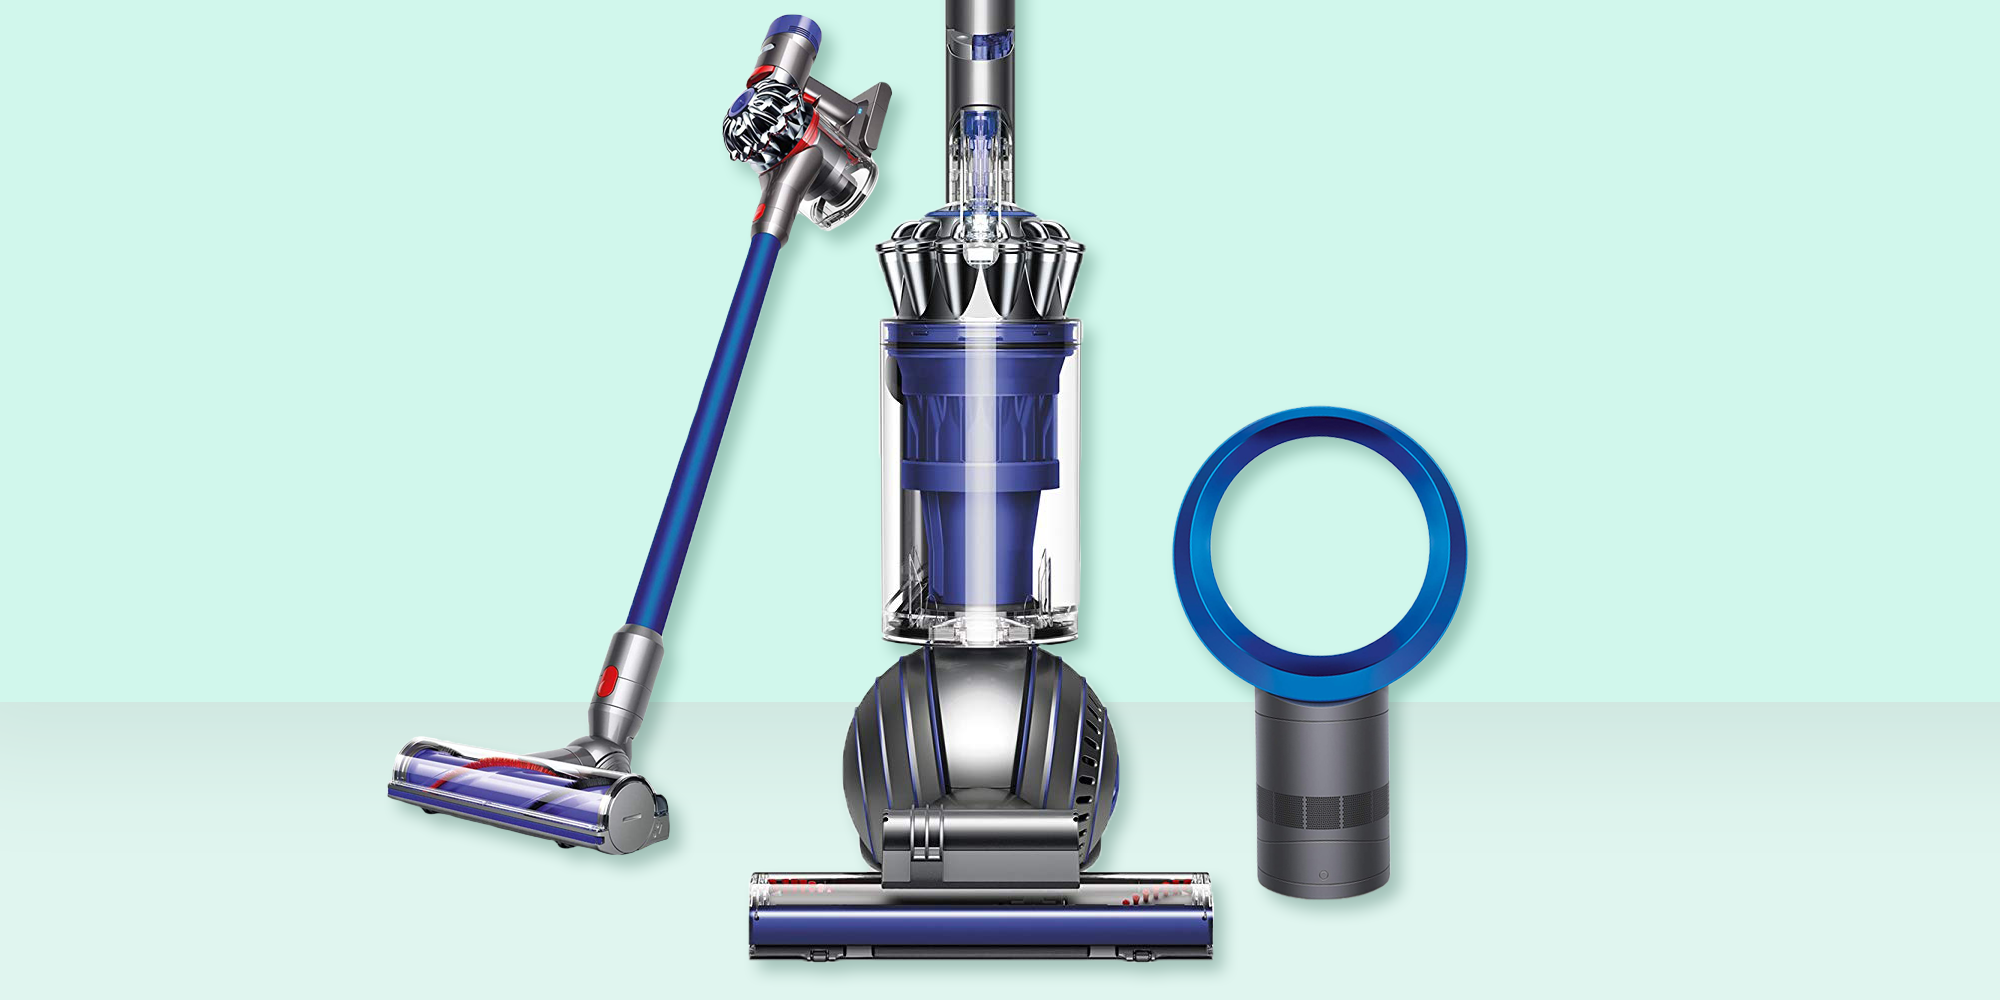 Take up to 42% off a Dyson Vacuum on Prime Day